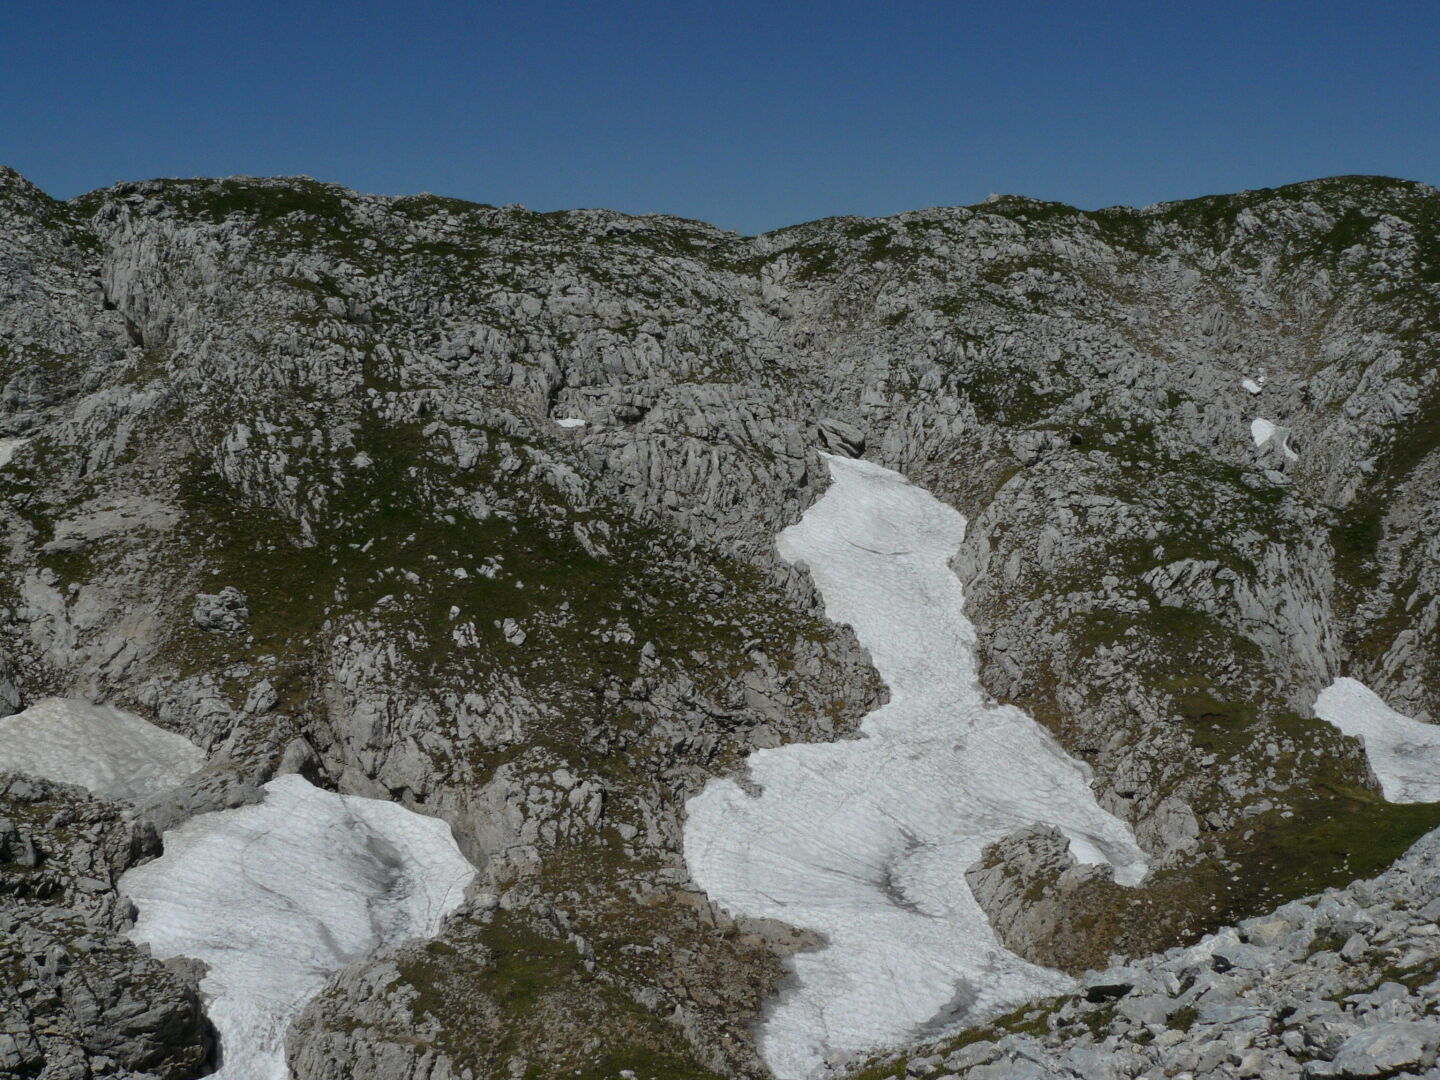 At this altitude, there&rsquo;s still snow left over from last winter.